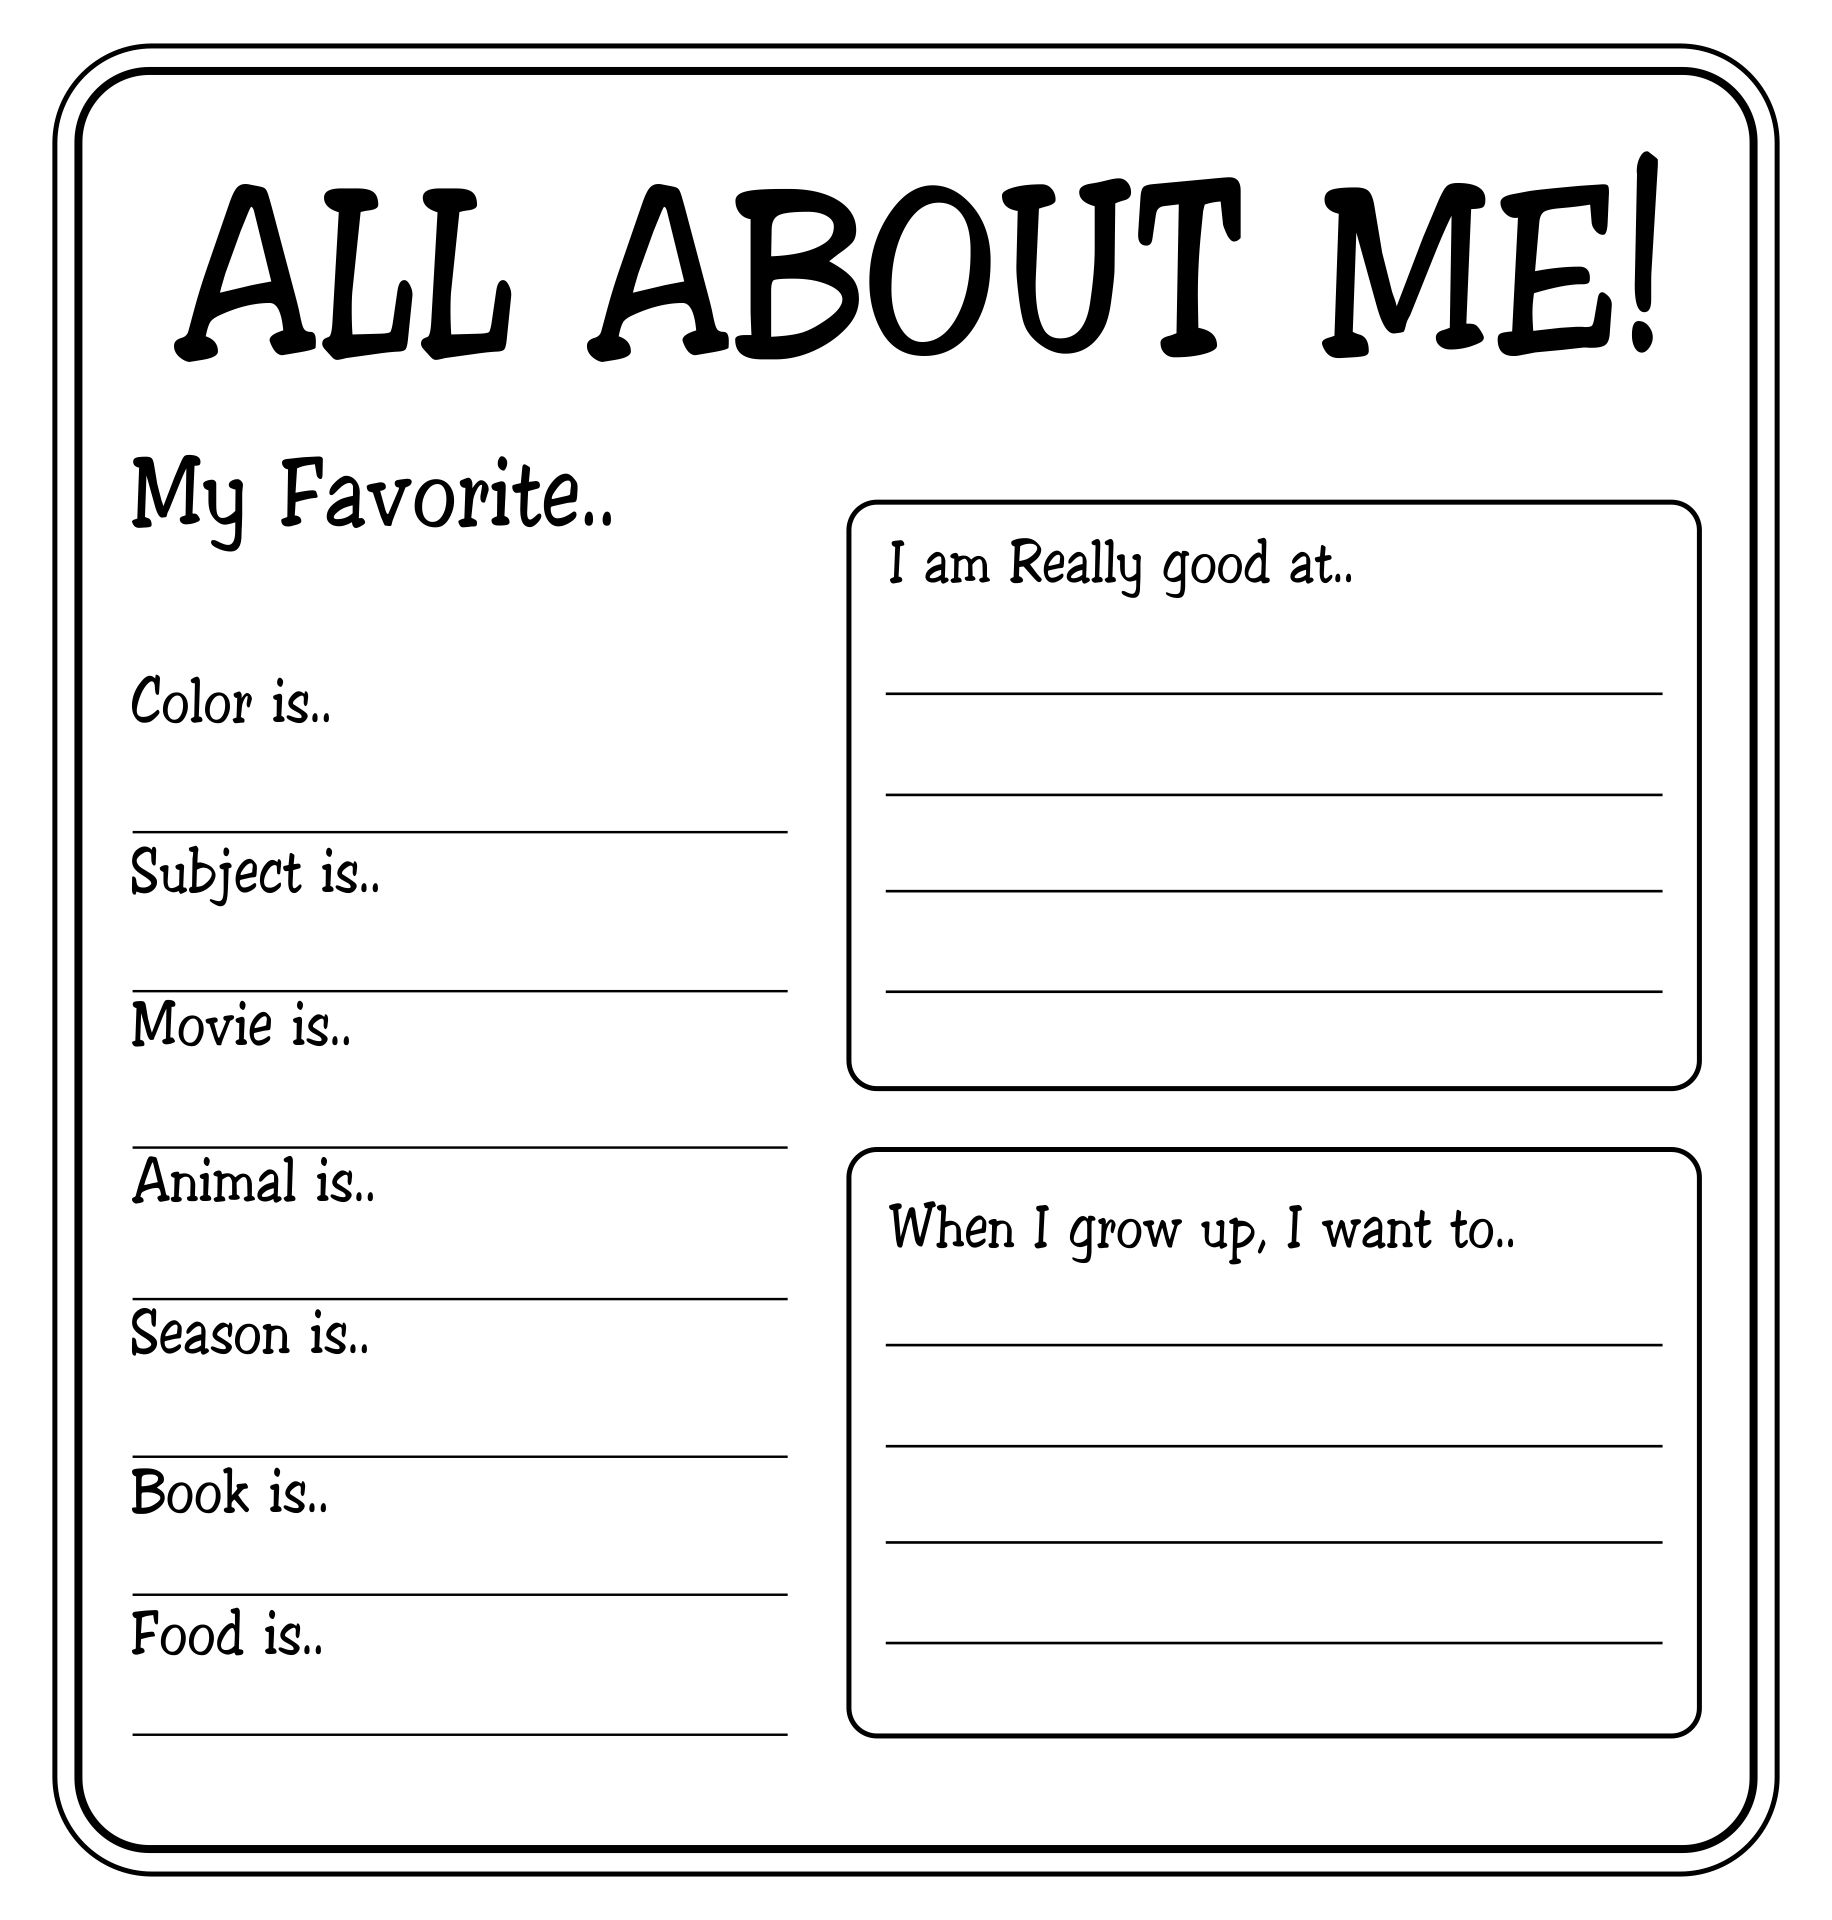 All About Me For Middle School Free Download